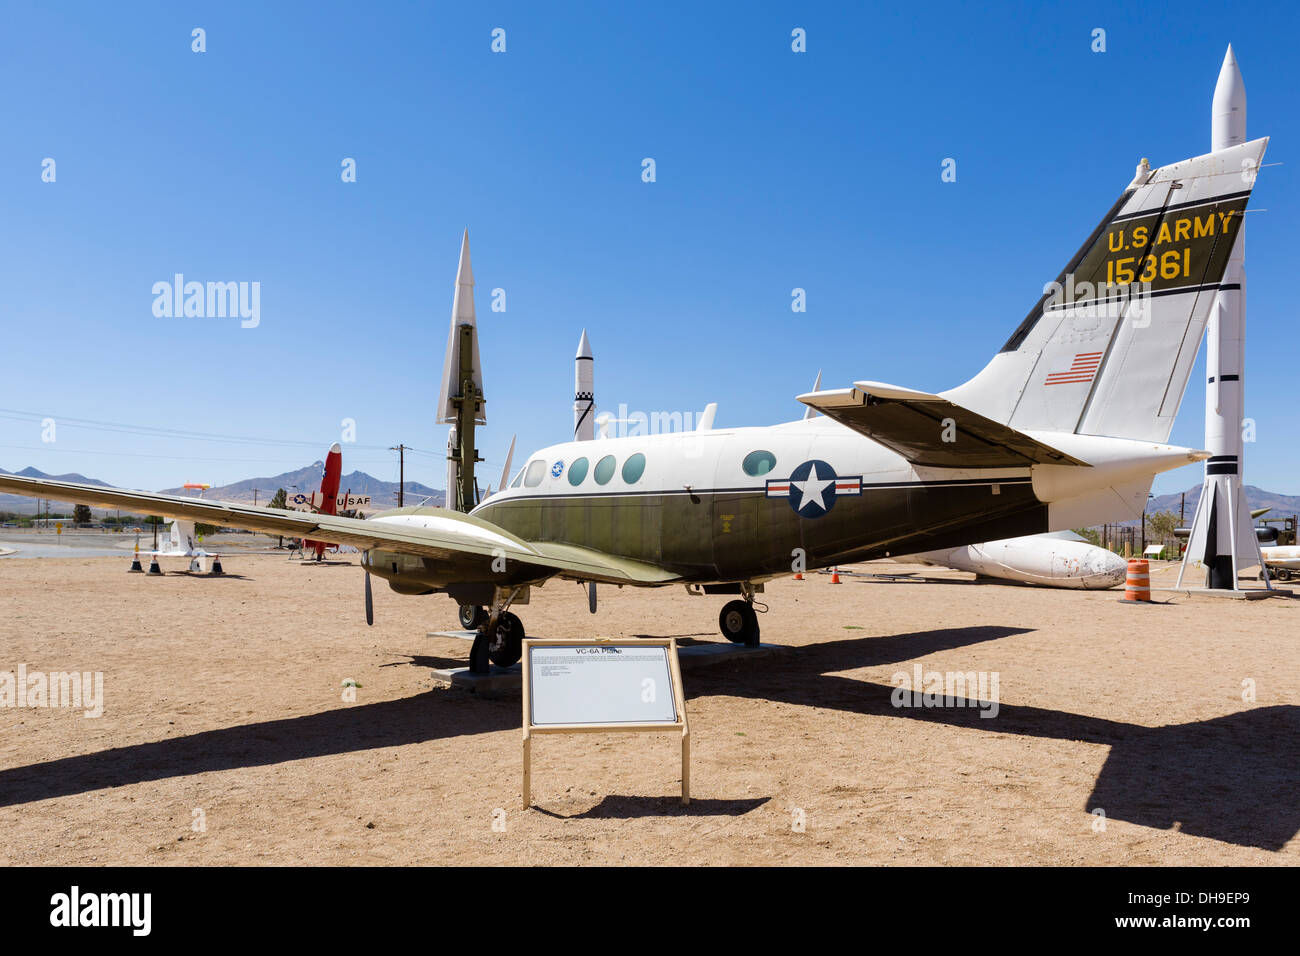 The VC-6A aircraft used by Dr Wernher von Braun, Missile Park at White Sands Missile Range, near Alamogordo, New Mexico, USA Stock Photo